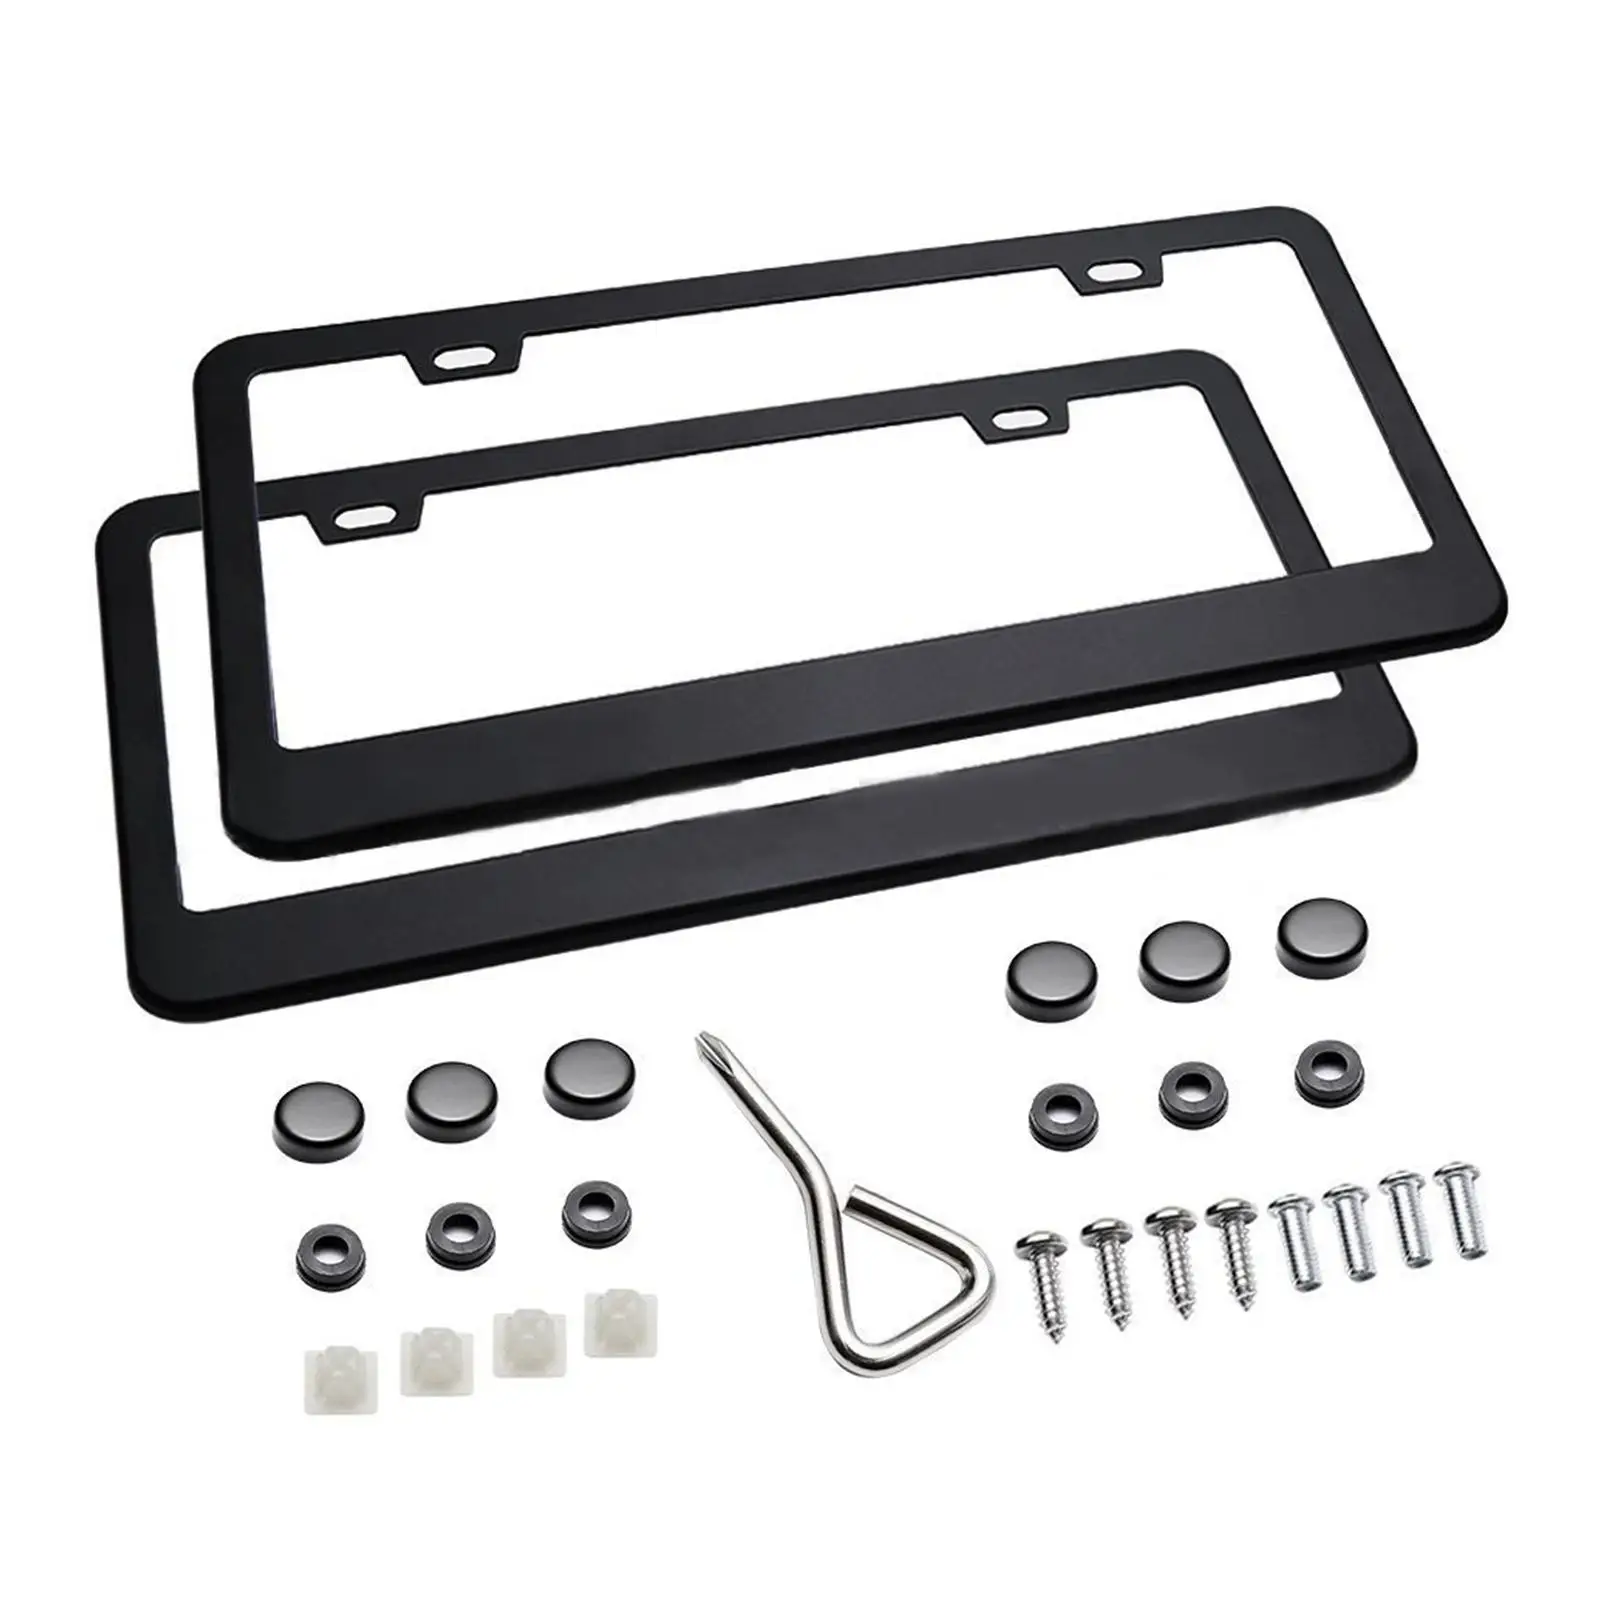 2 Pieces Car License Plate Frame Accessories Durable Easy to Install High Performance with Fixing Screws License Plate Bracket